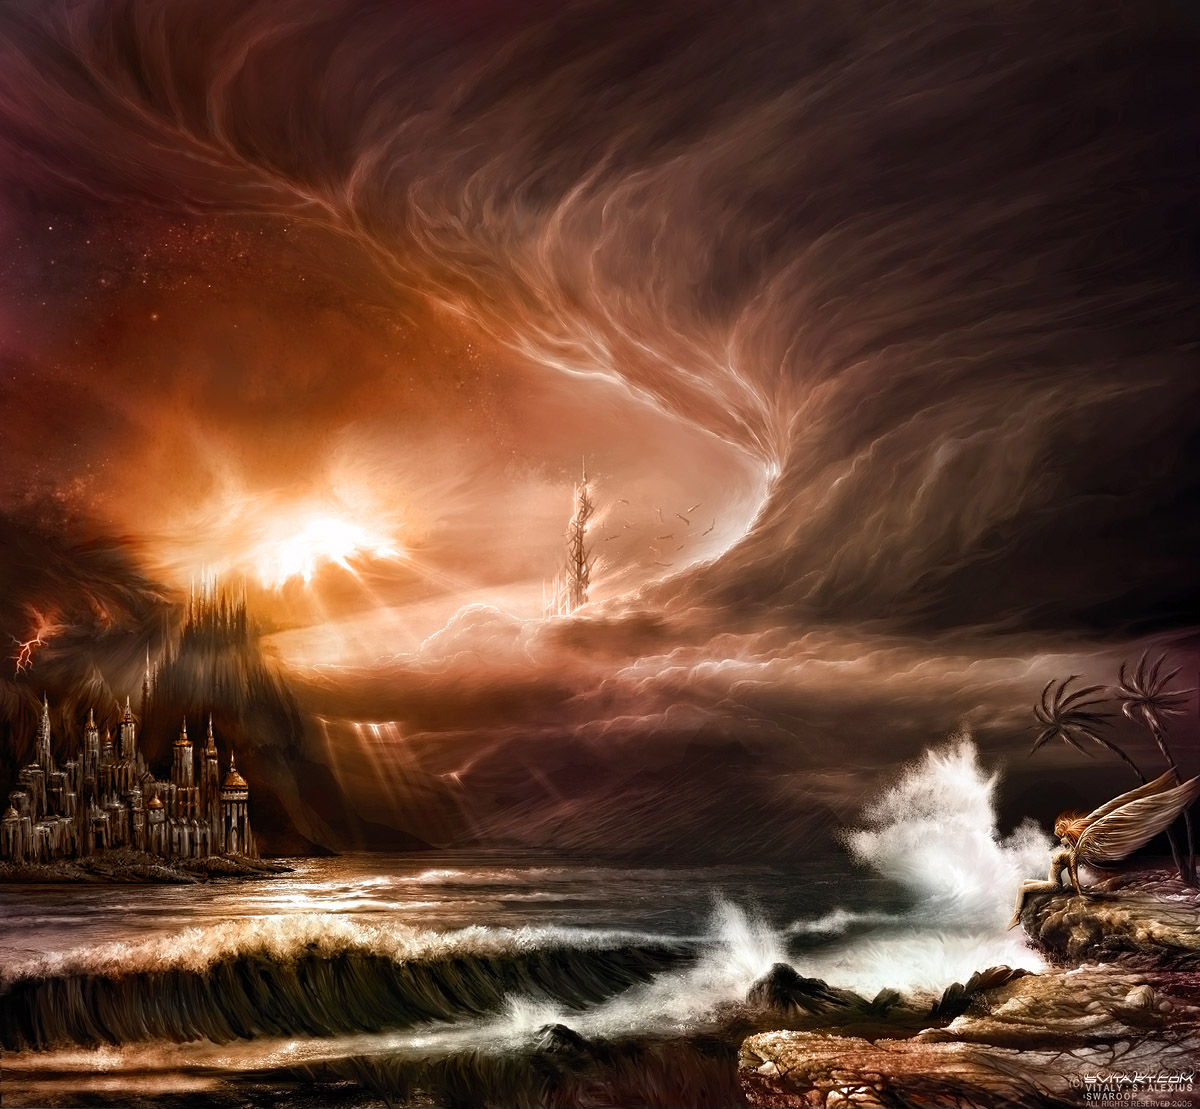 The_great_deluge_by_alexiuss.jpg